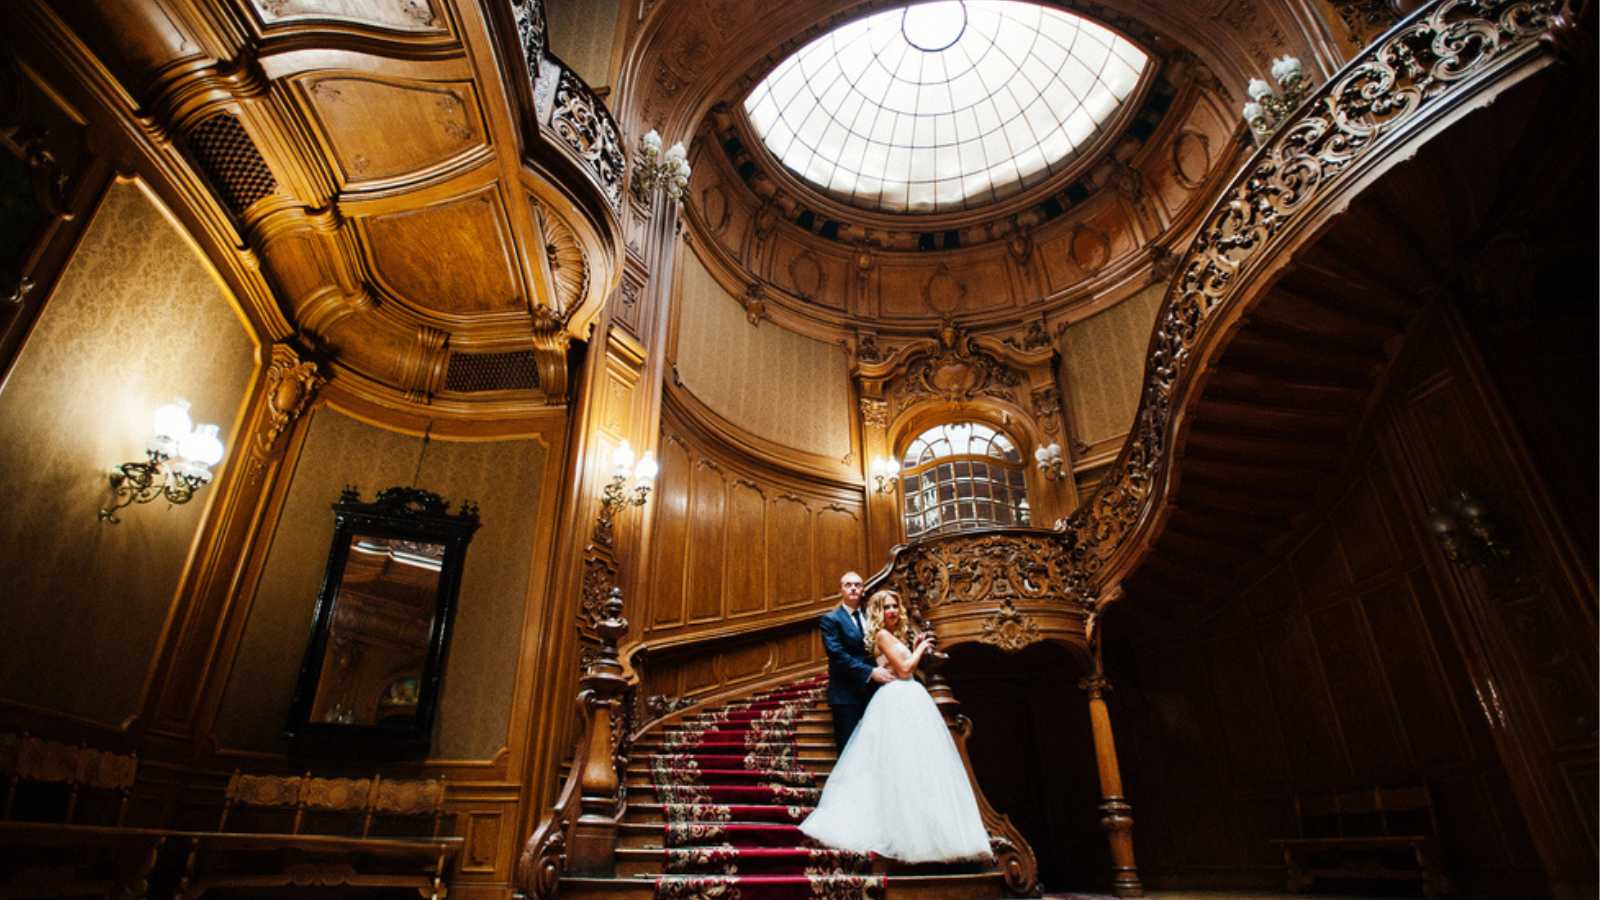 Elegant wedding couple at old vintage house and palace with big wooden stairs